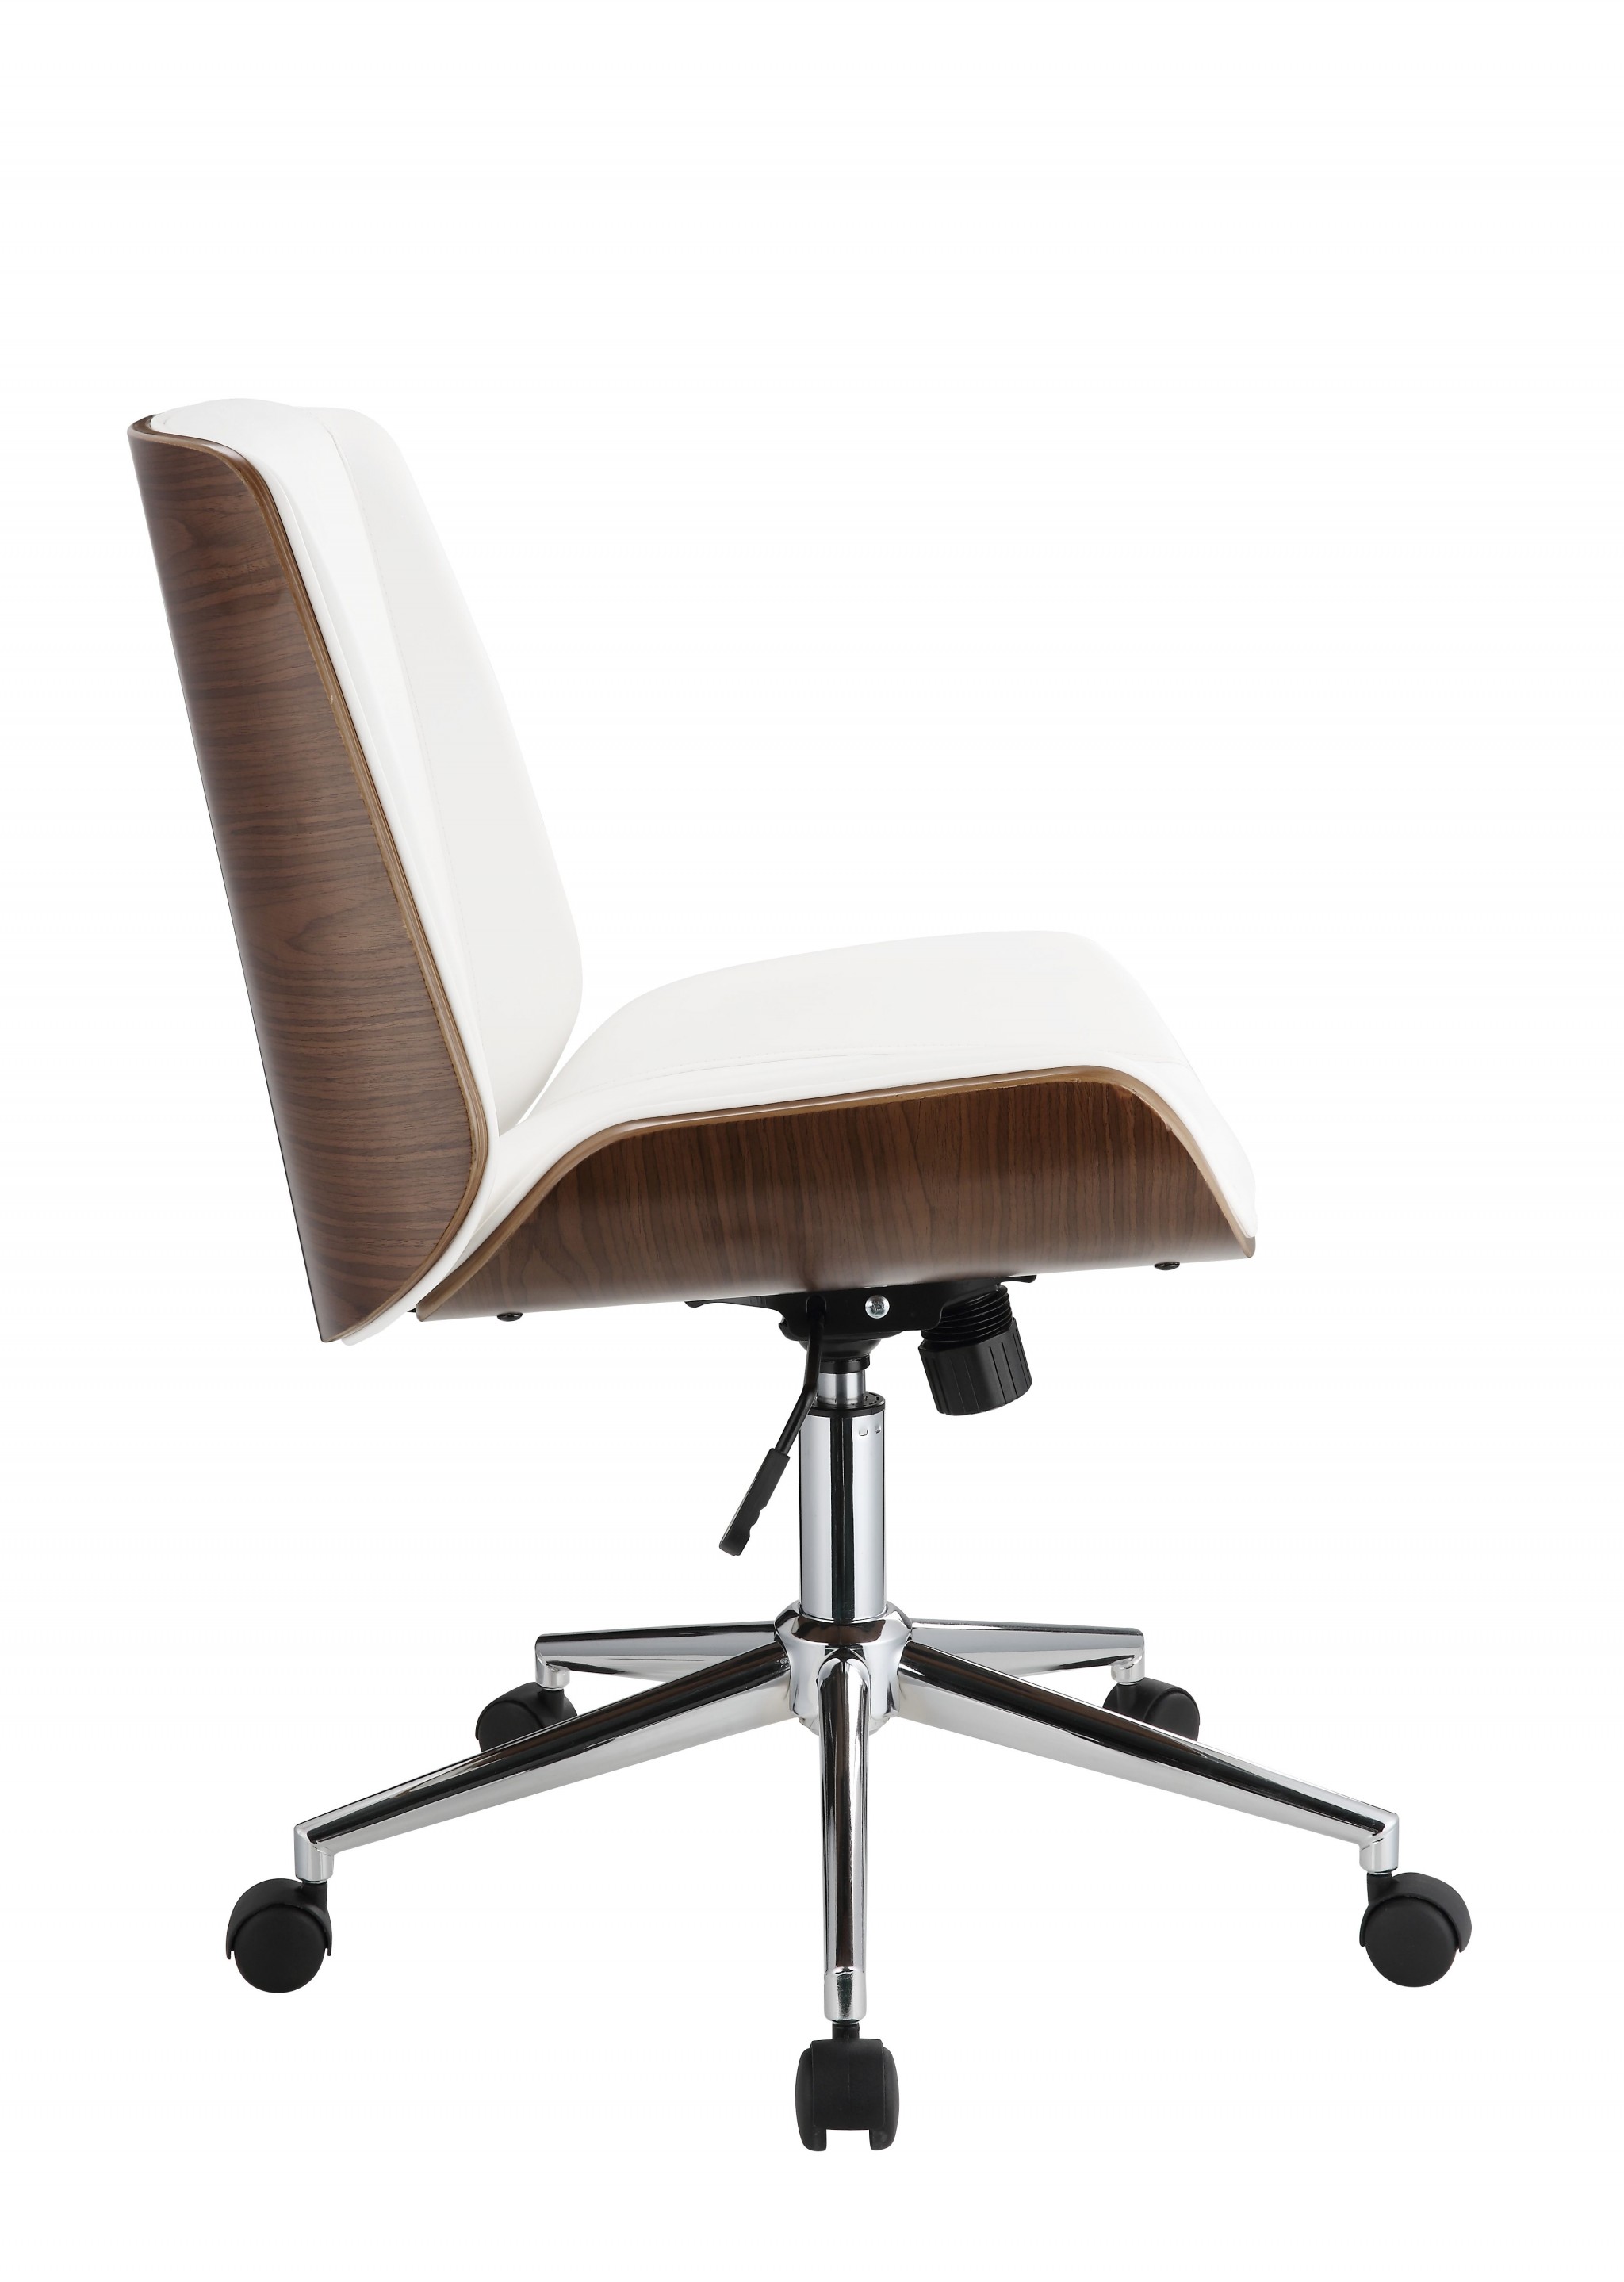 21" X 25" X 3438" White Leatherette And Walnut Office Chair